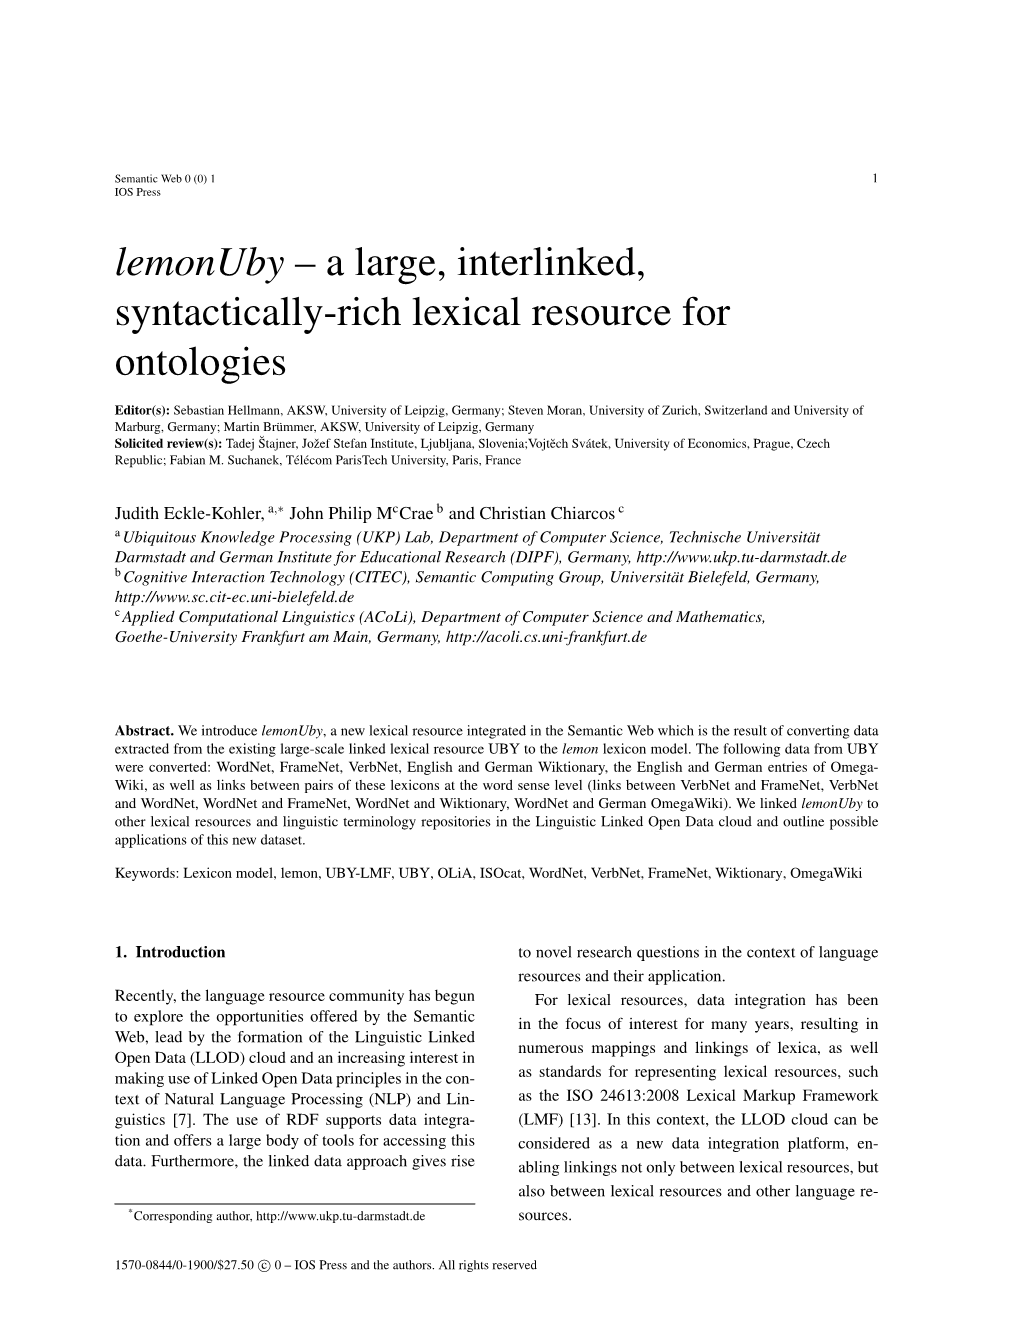 A Large, Interlinked, Syntactically-Rich Lexical Resource for Ontologies